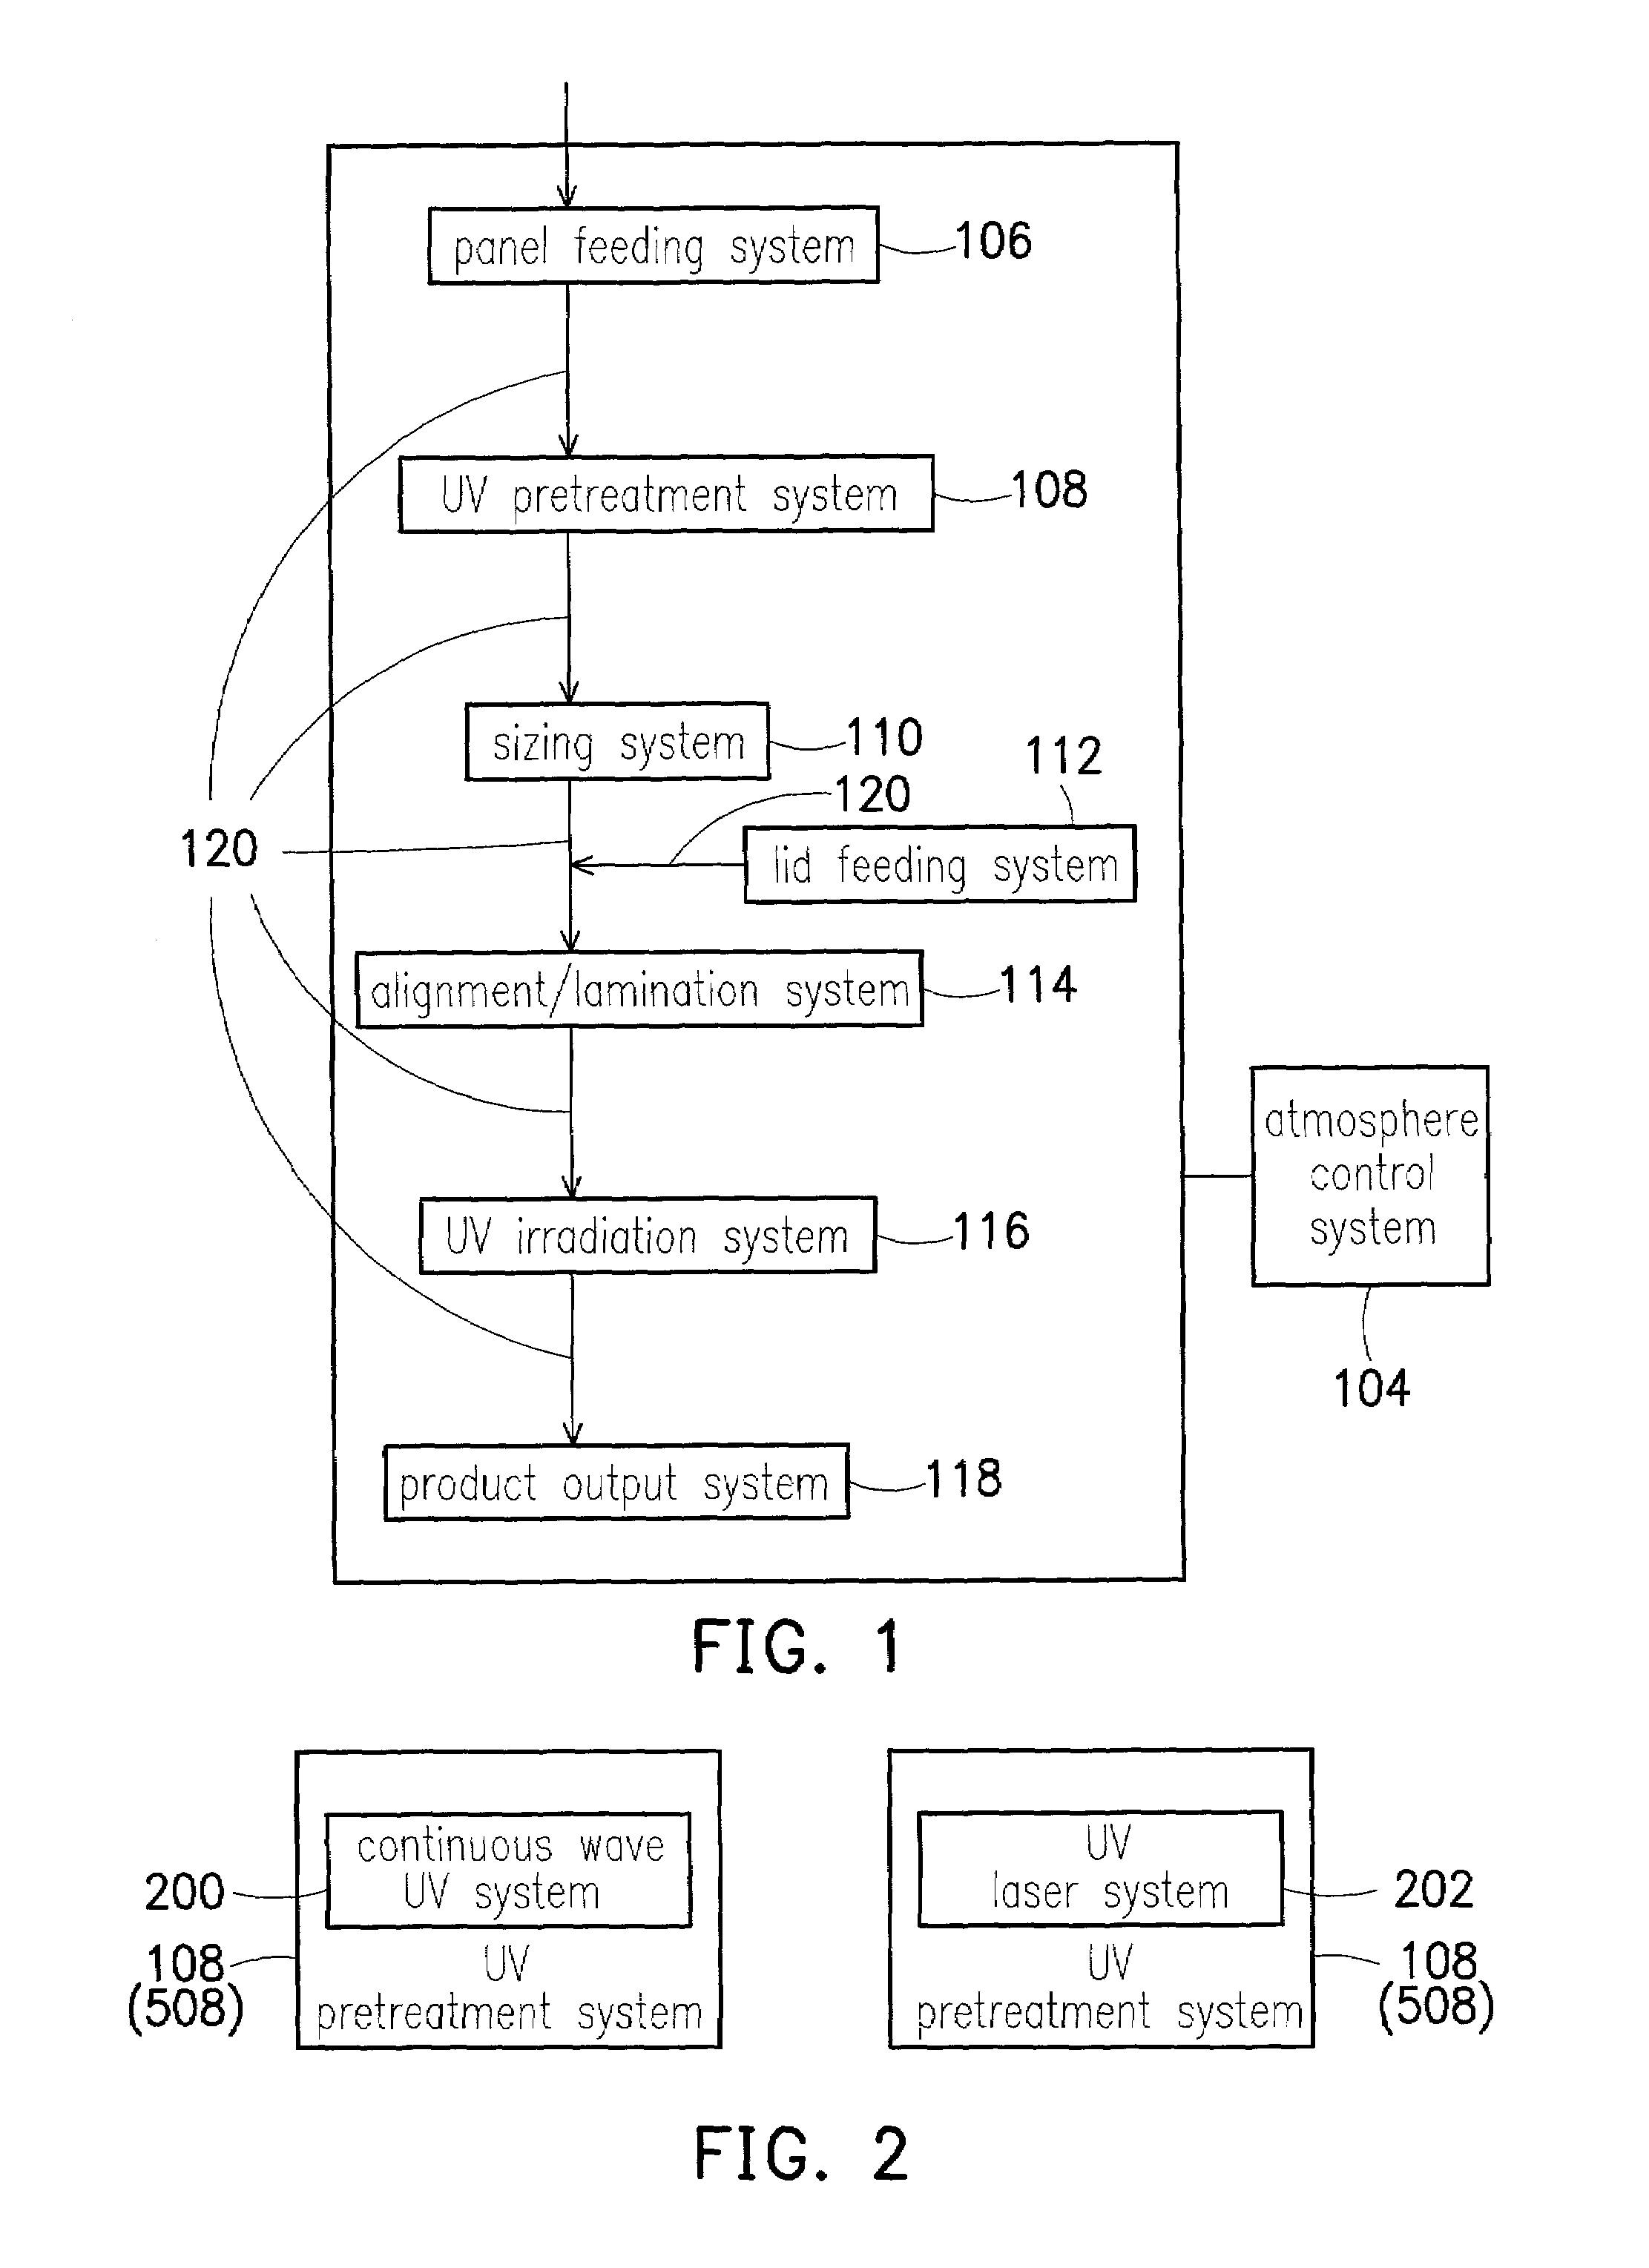 Mass-production packaging means and mass-production packaging method